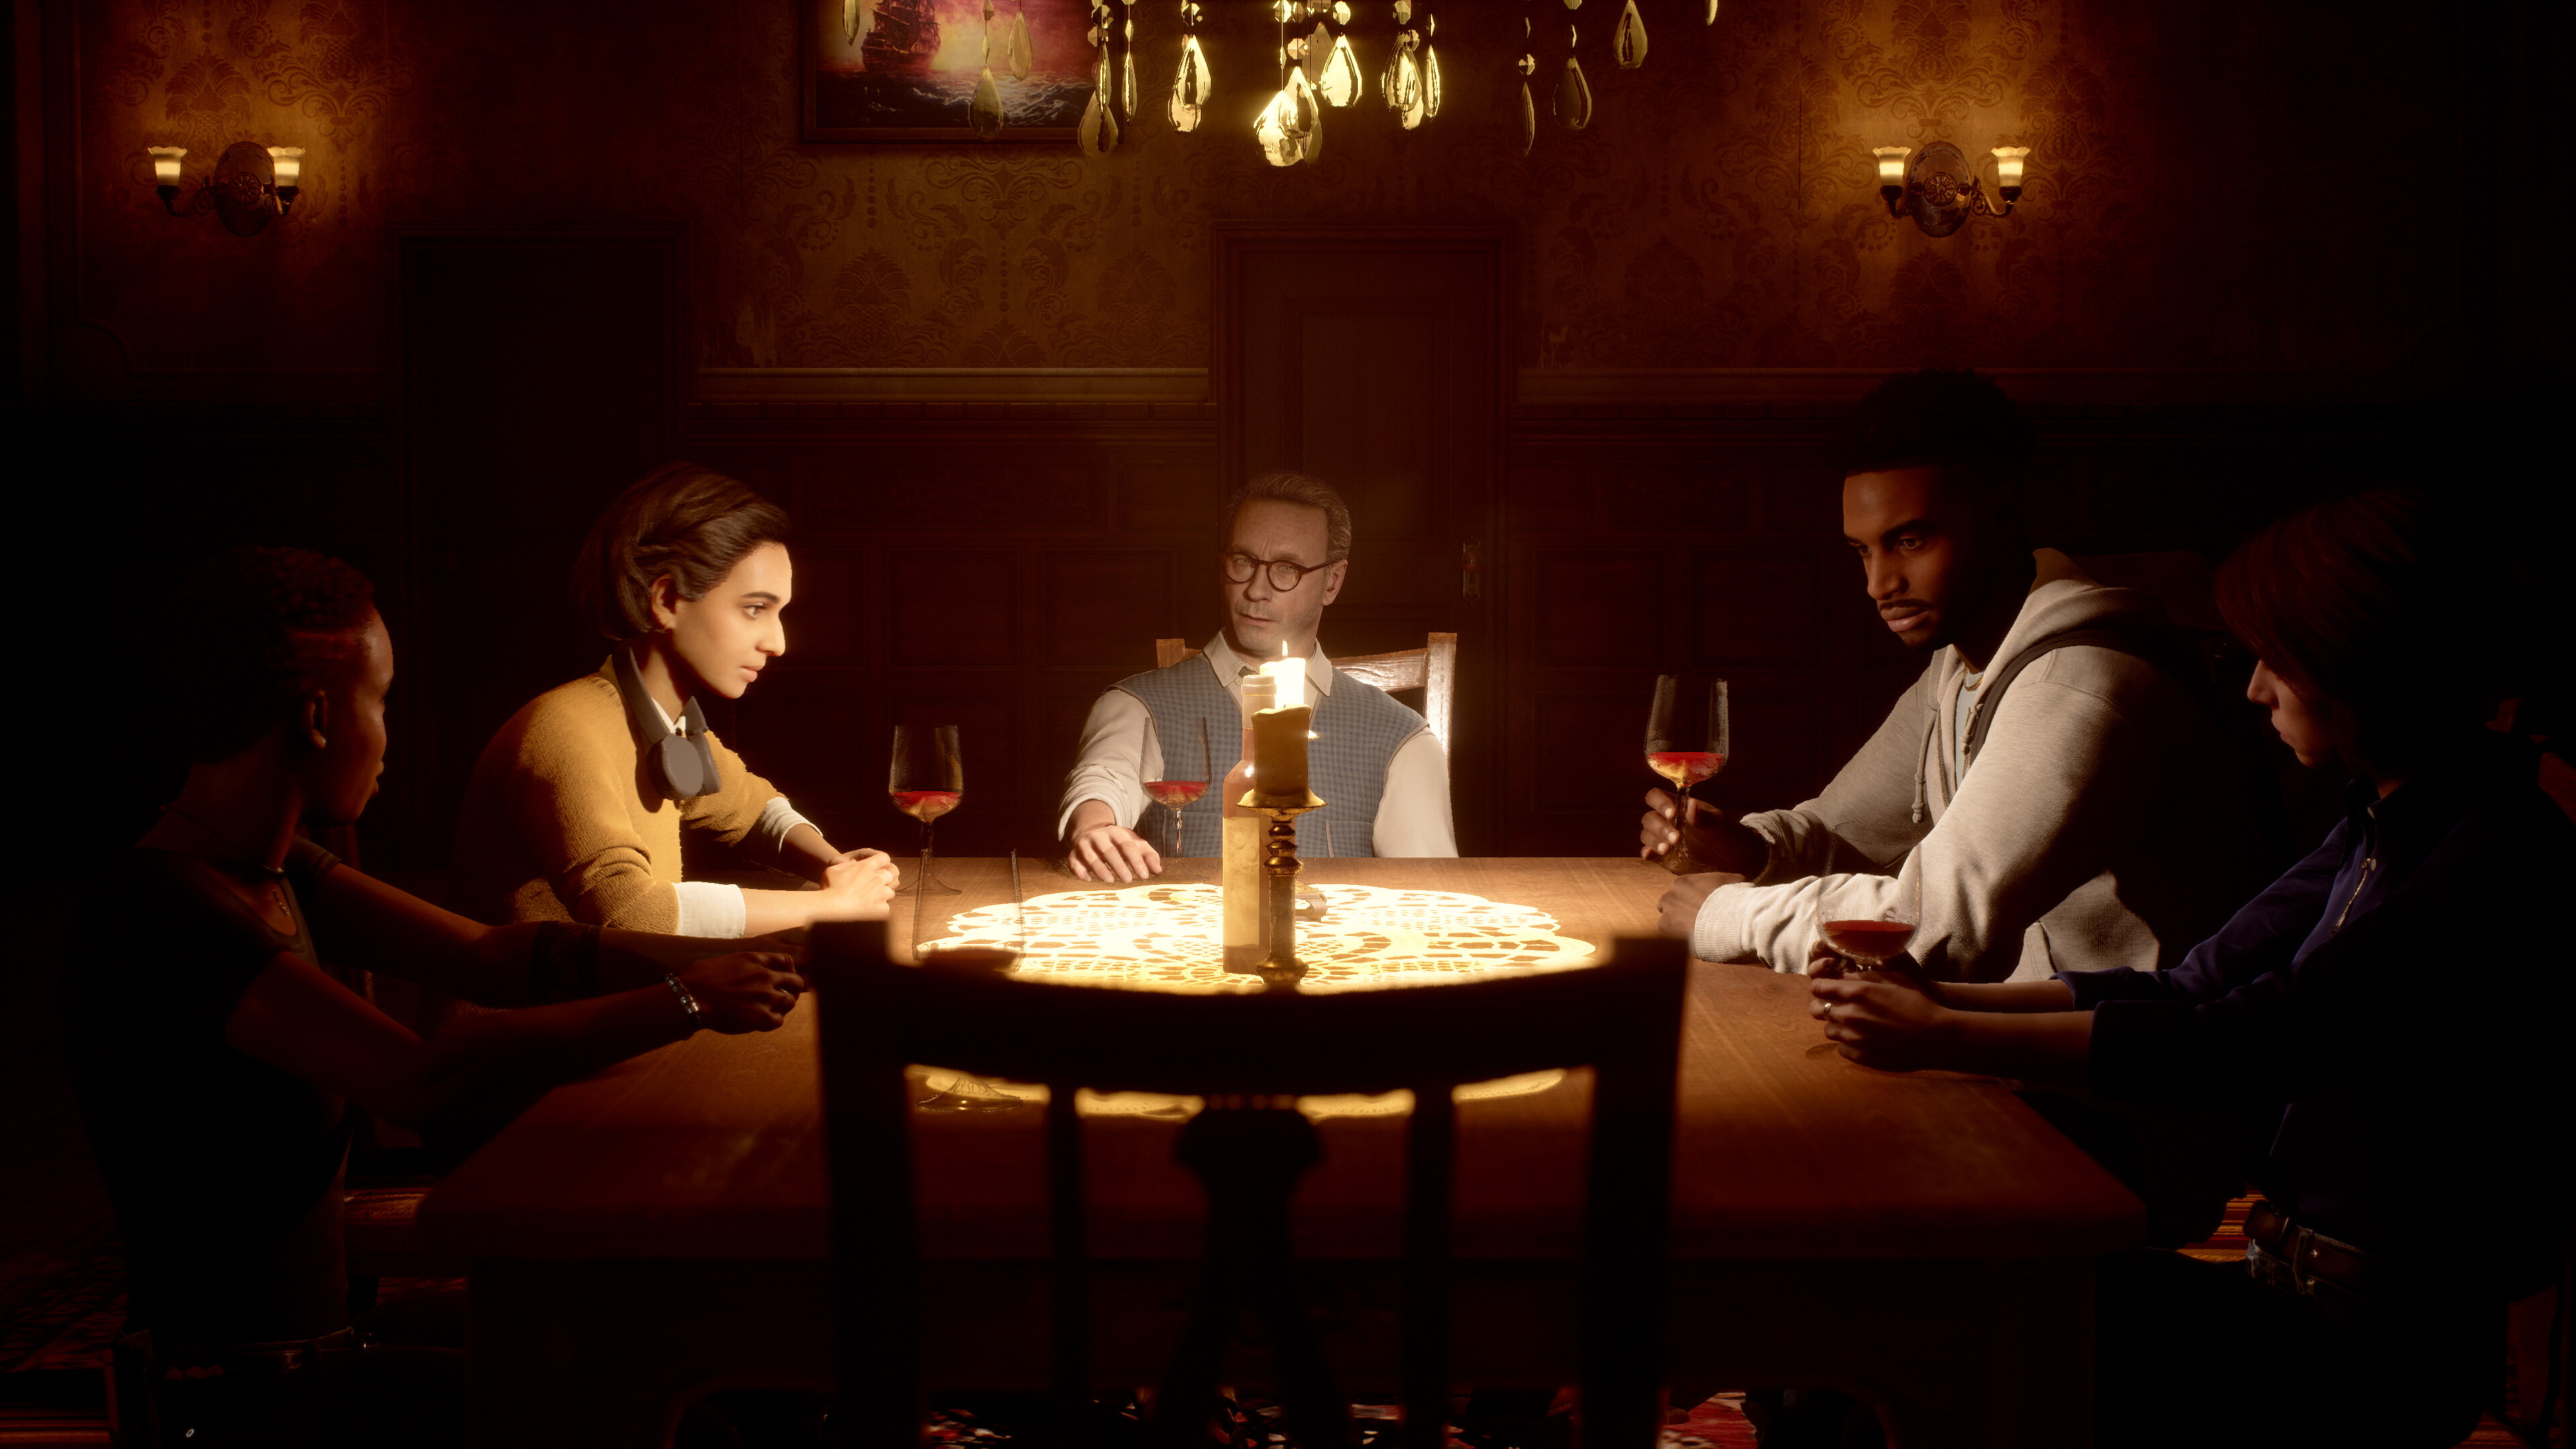 The cast of a true crime show sit in a forbidding dining room, sitting around a table and making conversation, in The Dark Pictures Anthology: The Devil in Me.